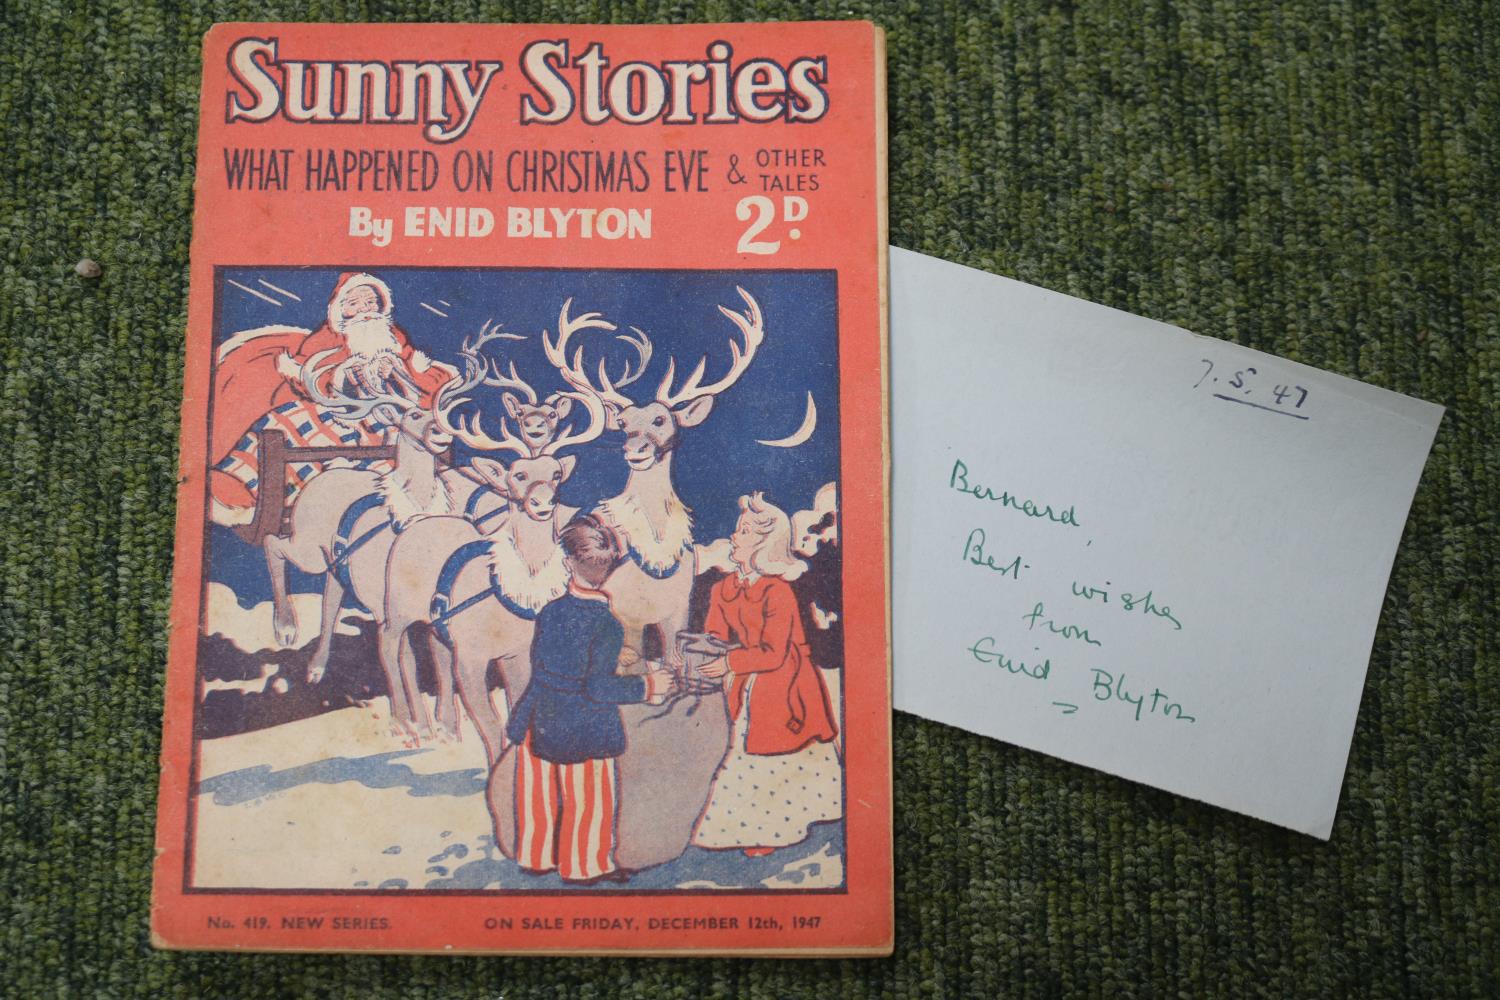 Suny Stories What Happened on Christmas Eve by Enid Blyton Bernard Best wishes from Enid Blyton